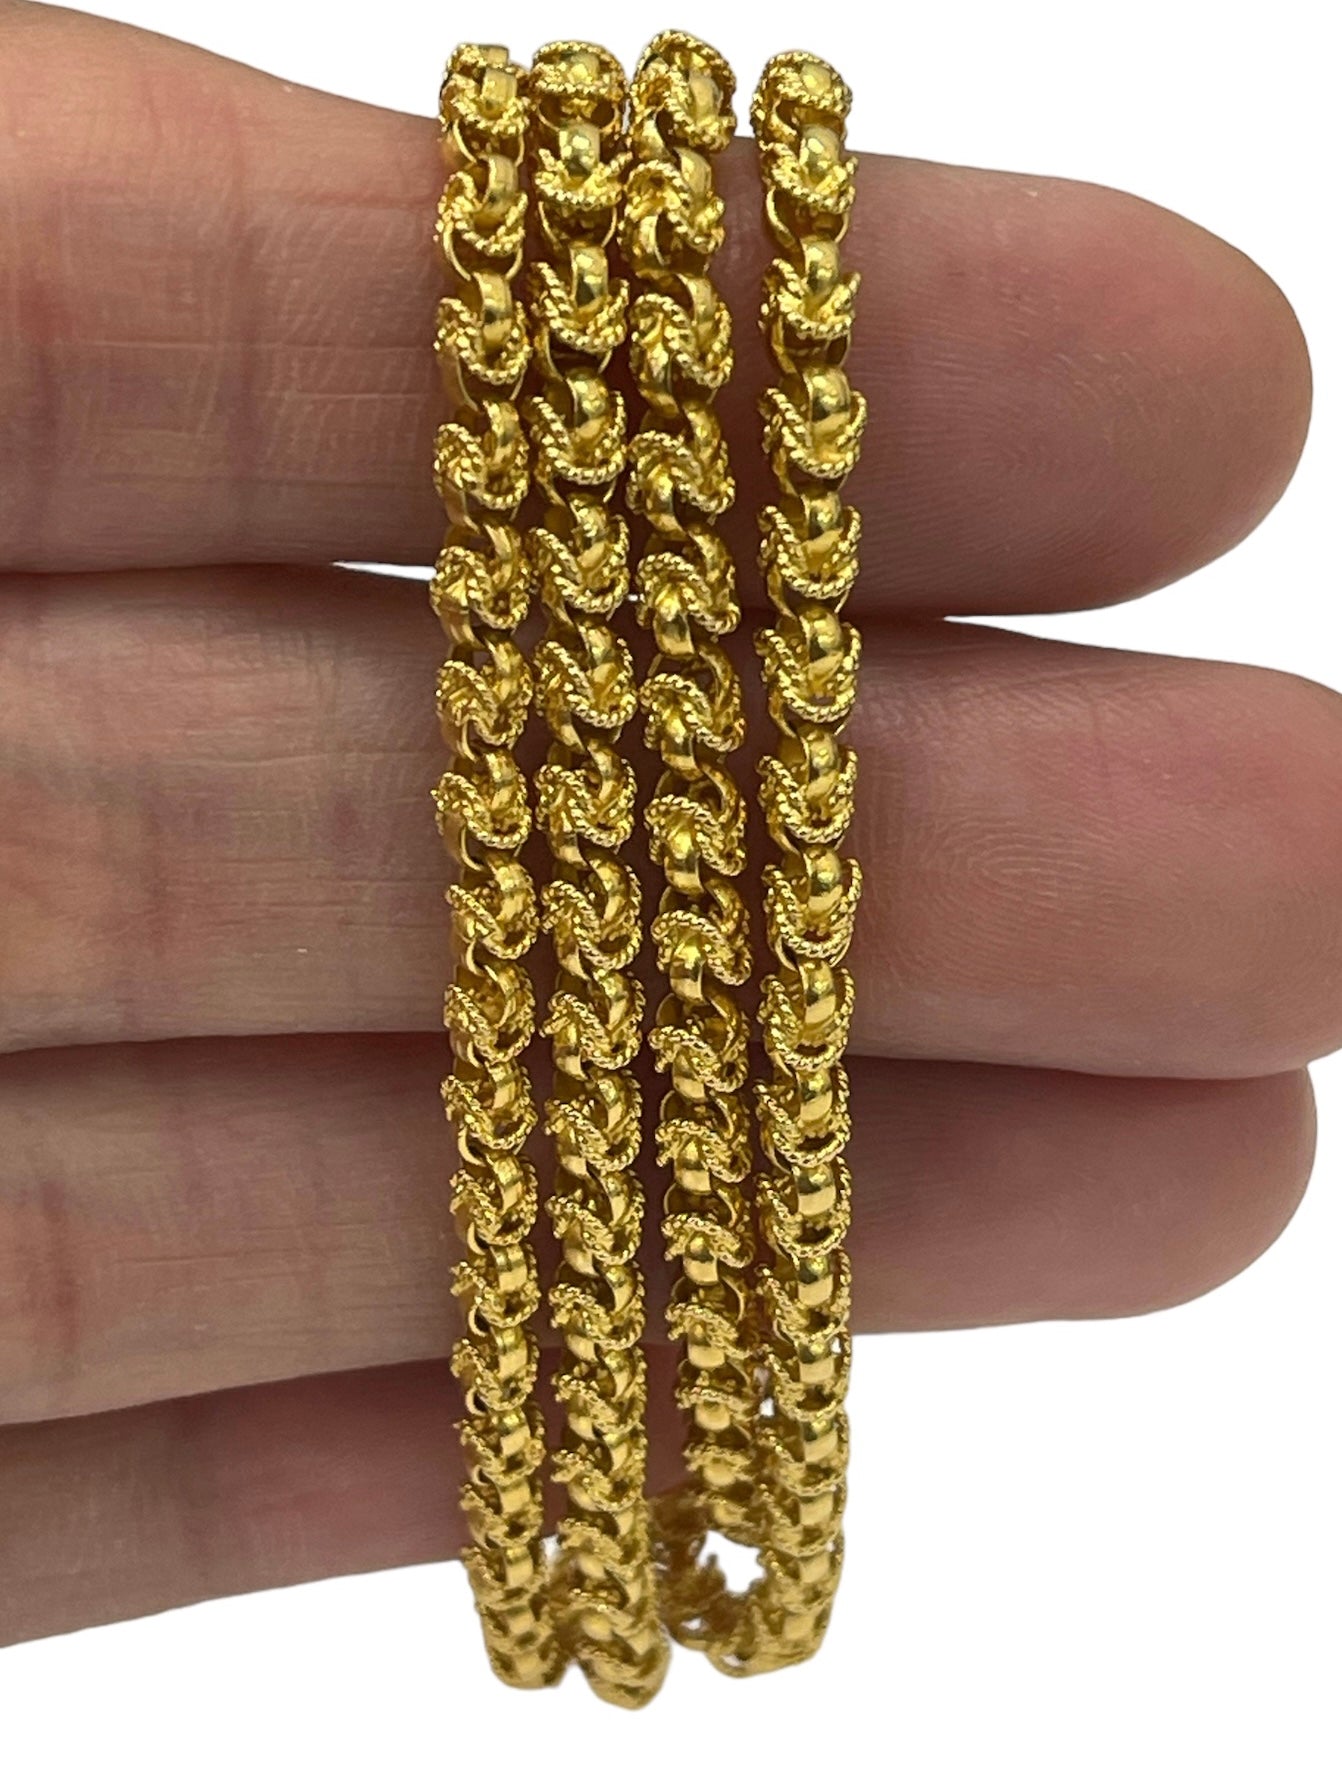 Flower Bud Yellow Gold Necklace Chain 21" Solid 18kt